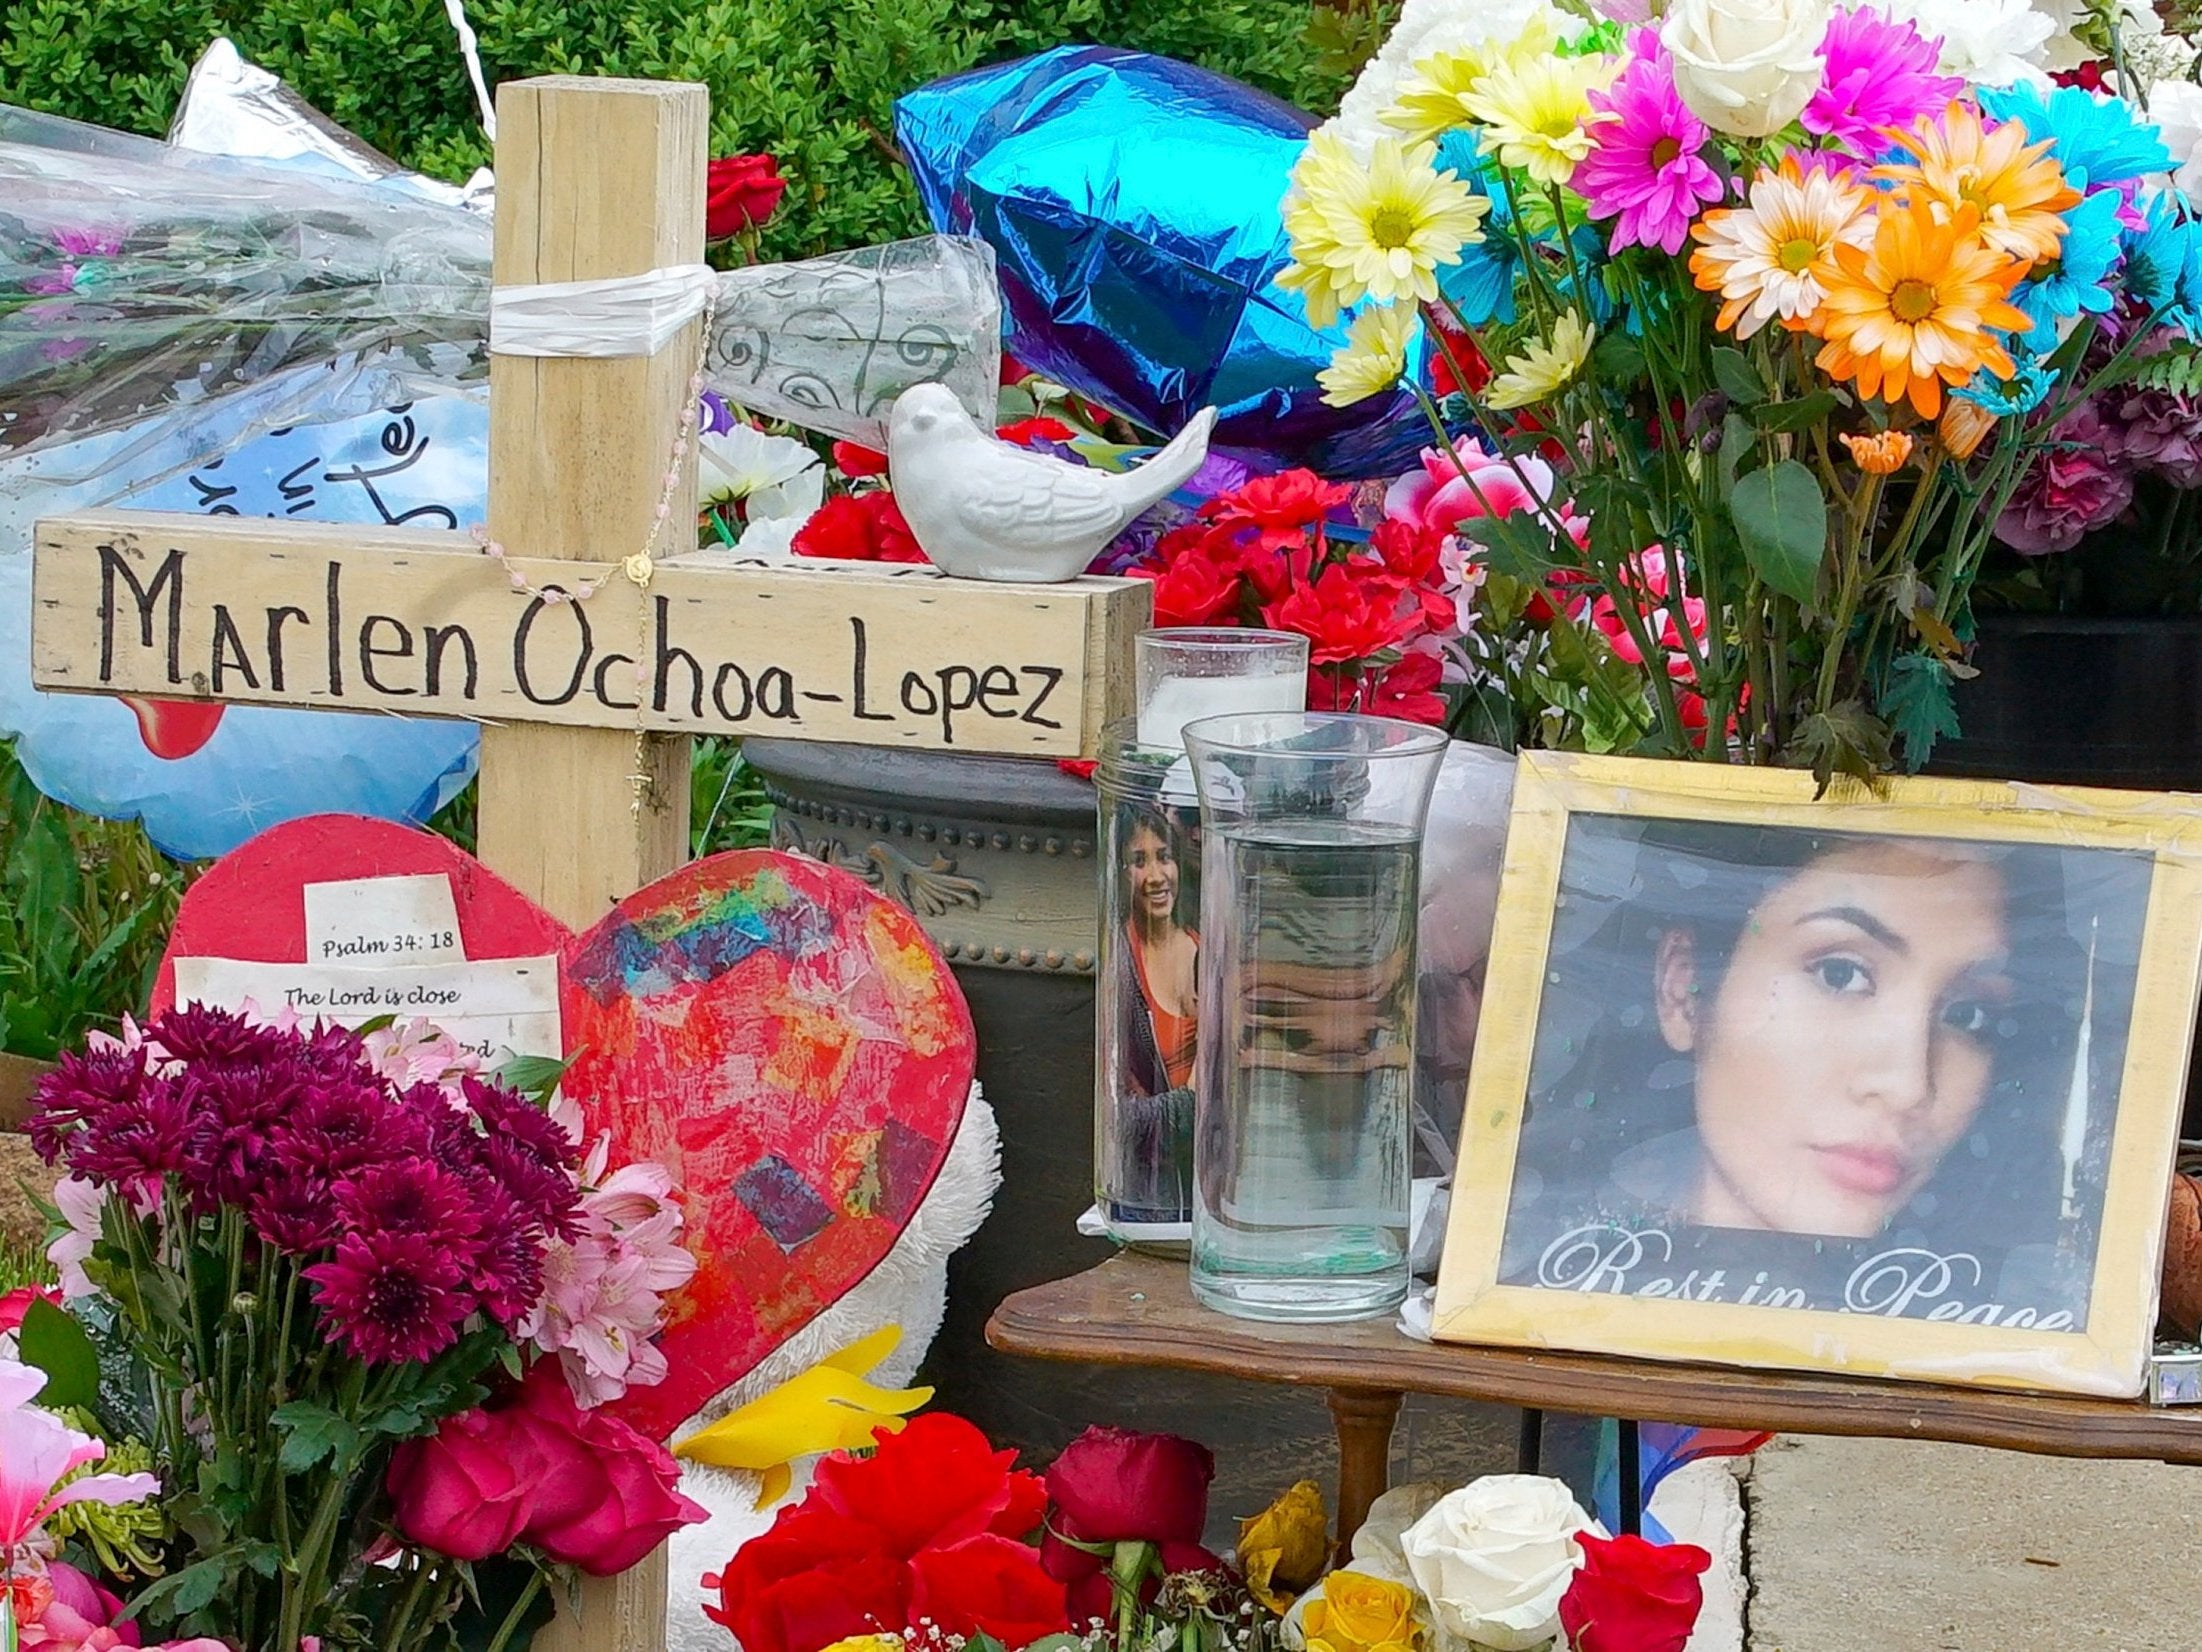 A memorial of flowers, balloons, a cross and photo of victim Marlen Ochoa-Lopez, are displayed on the lawn